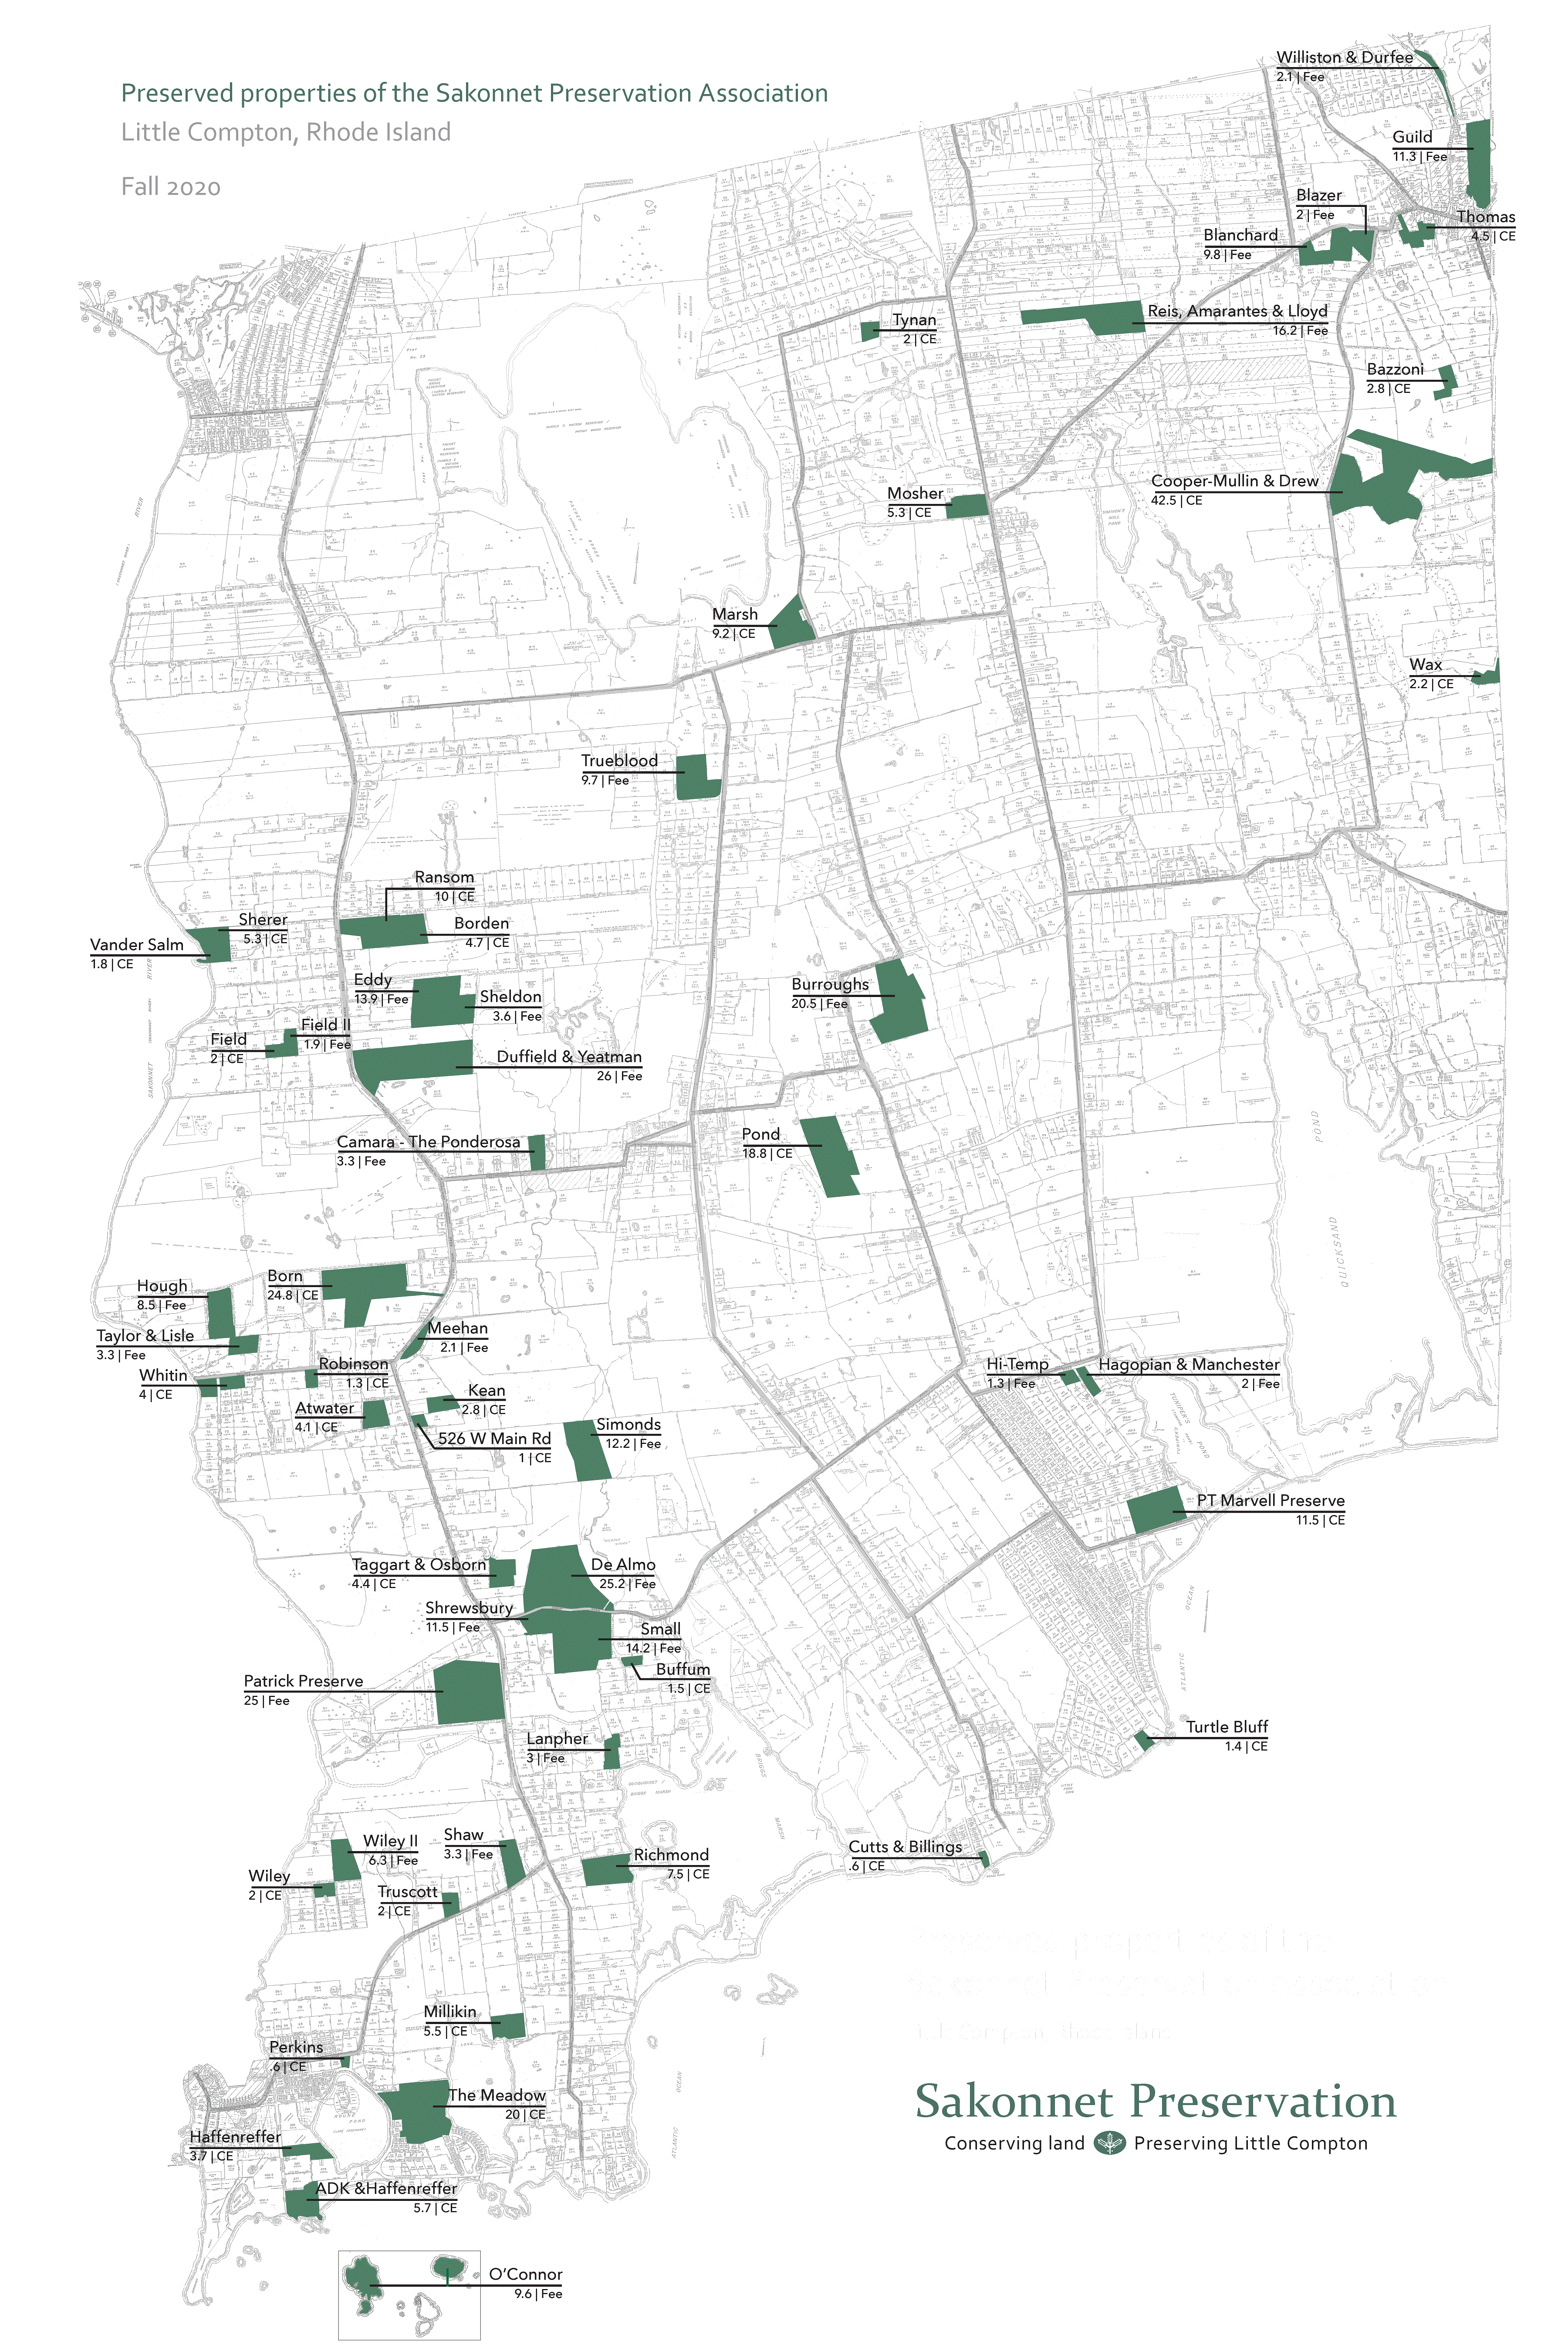 A black and white map of Little Compton with north at the top. At top left, it is labeled as "Preserved properties of the Sakonnet Preservation Association // Little Compton, Rhode Island // Fall 2020". Properties preserved by SPA are scattered across the map, with their parcels highlighted in green.  They are labeled by the owner at the time we acquired the property outright (Fee) or as a conservation easement (CE) & the number of acres.